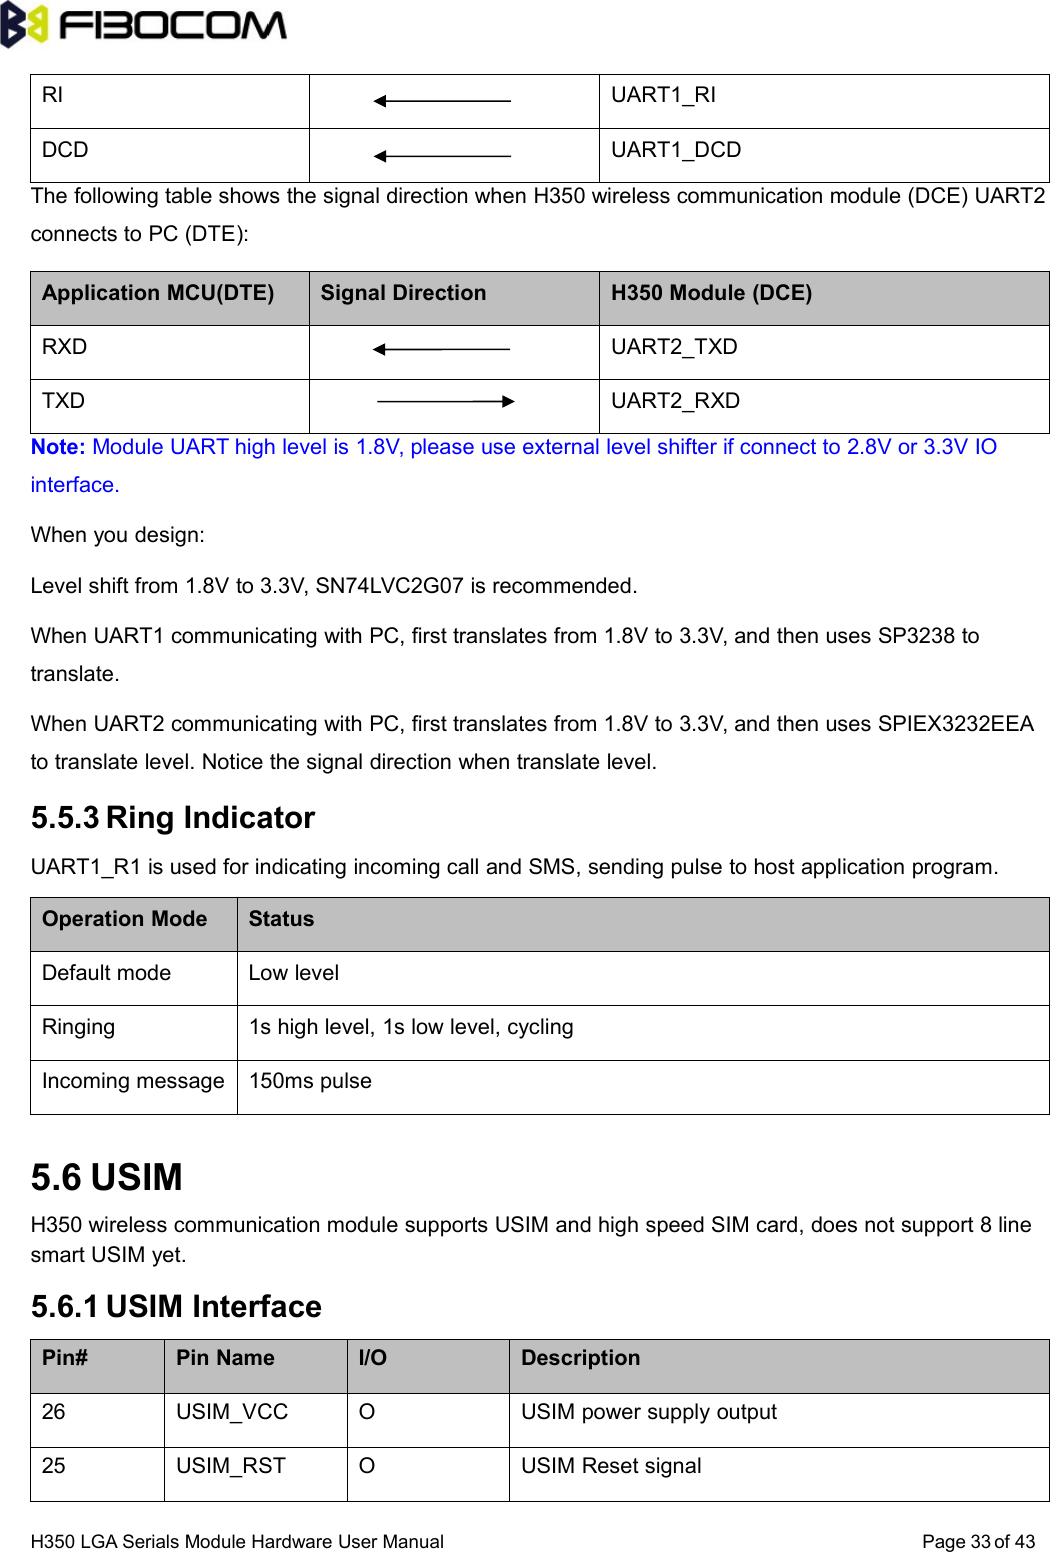 H350 LGA Serials Module Hardware User Manual Page of 4333RI UART1_RIDCD UART1_DCDThe following table shows the signal direction when H350 wireless communication module (DCE) UART2connects to PC (DTE):Application MCU(DTE) Signal Direction H350 Module (DCE)RXD UART2_TXDTXD UART2_RXDNote: Module UART high level is 1.8V, please use external level shifter if connect to 2.8V or 3.3V IOinterface.When you design:Level shift from 1.8V to 3.3V, SN74LVC2G07 is recommended.When UART1 communicating with PC, first translates from 1.8V to 3.3V, and then uses SP3238 totranslate.When UART2 communicating with PC, first translates from 1.8V to 3.3V, and then uses SPIEX3232EEAto translate level. Notice the signal direction when translate level.5.5.3 Ring IndicatorUART1_R1 is used for indicating incoming call and SMS, sending pulse to host application program.Operation Mode StatusDefault mode Low levelRinging 1s high level, 1s low level, cyclingIncoming message 150ms pulse5.6 USIMH350 wireless communication module supports USIM and high speed SIM card, does not support 8 linesmart USIM yet.5.6.1 USIM InterfacePin# Pin Name I/O Description26 USIM_VCC O USIM power supply output25 USIM_RST O USIM Reset signal